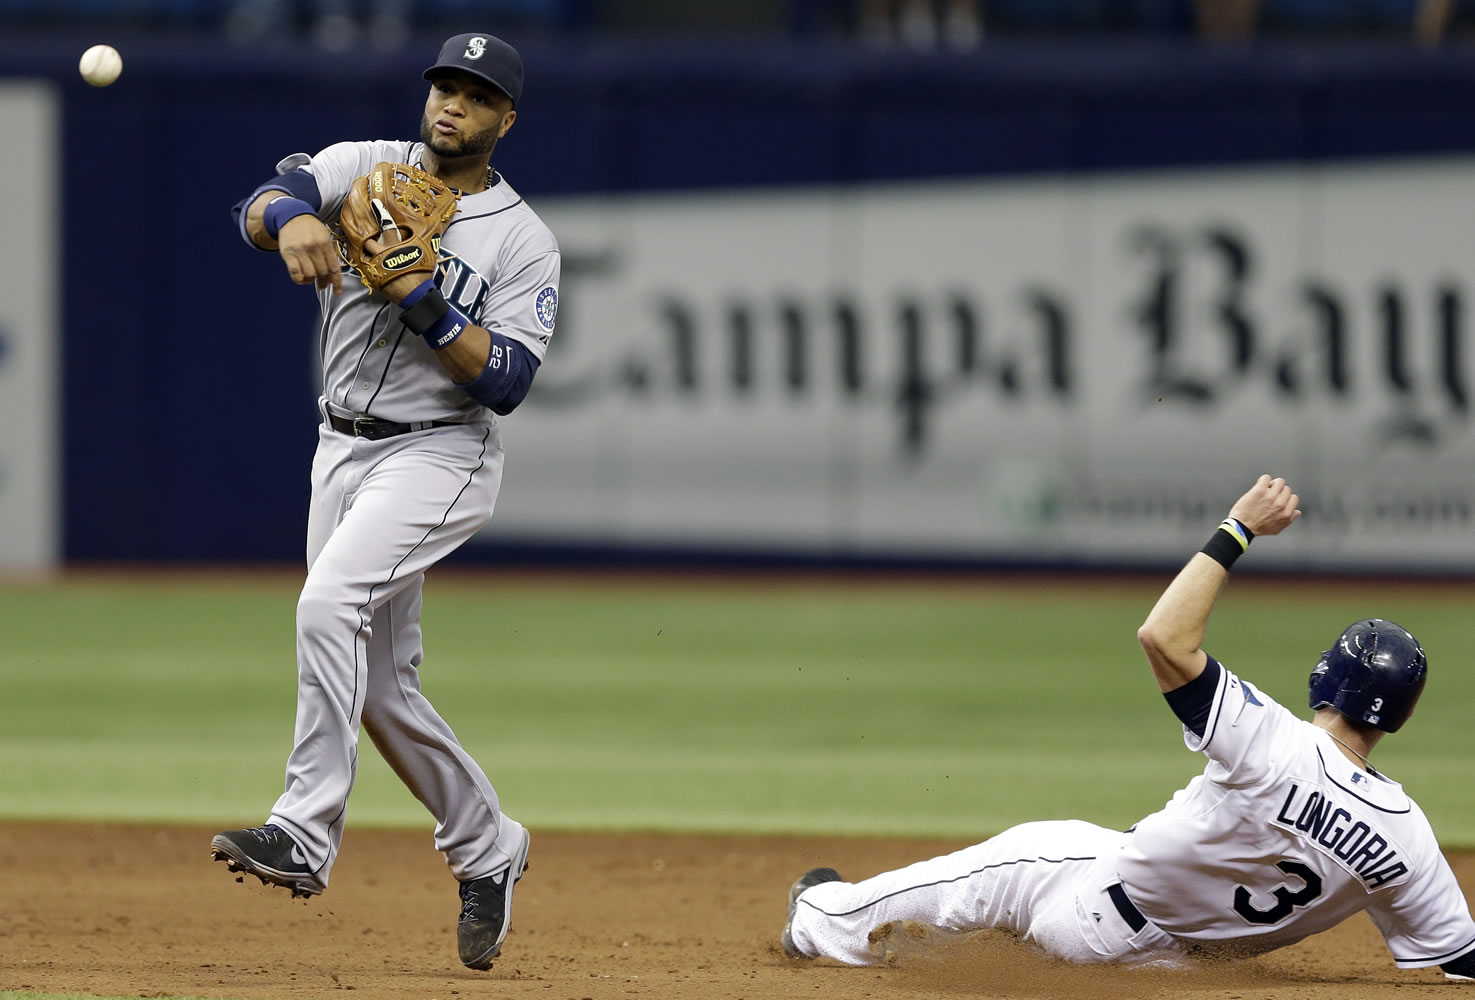 Seattle Mariners second baseman Robinson Cano, left, forces Tampa Bay Rays' Evan Longoria at second base and turns an unassisted double play on James Loney during the seventh inning of a baseball game Monday, June 9, 2014, in St. Petersburg, Fla.